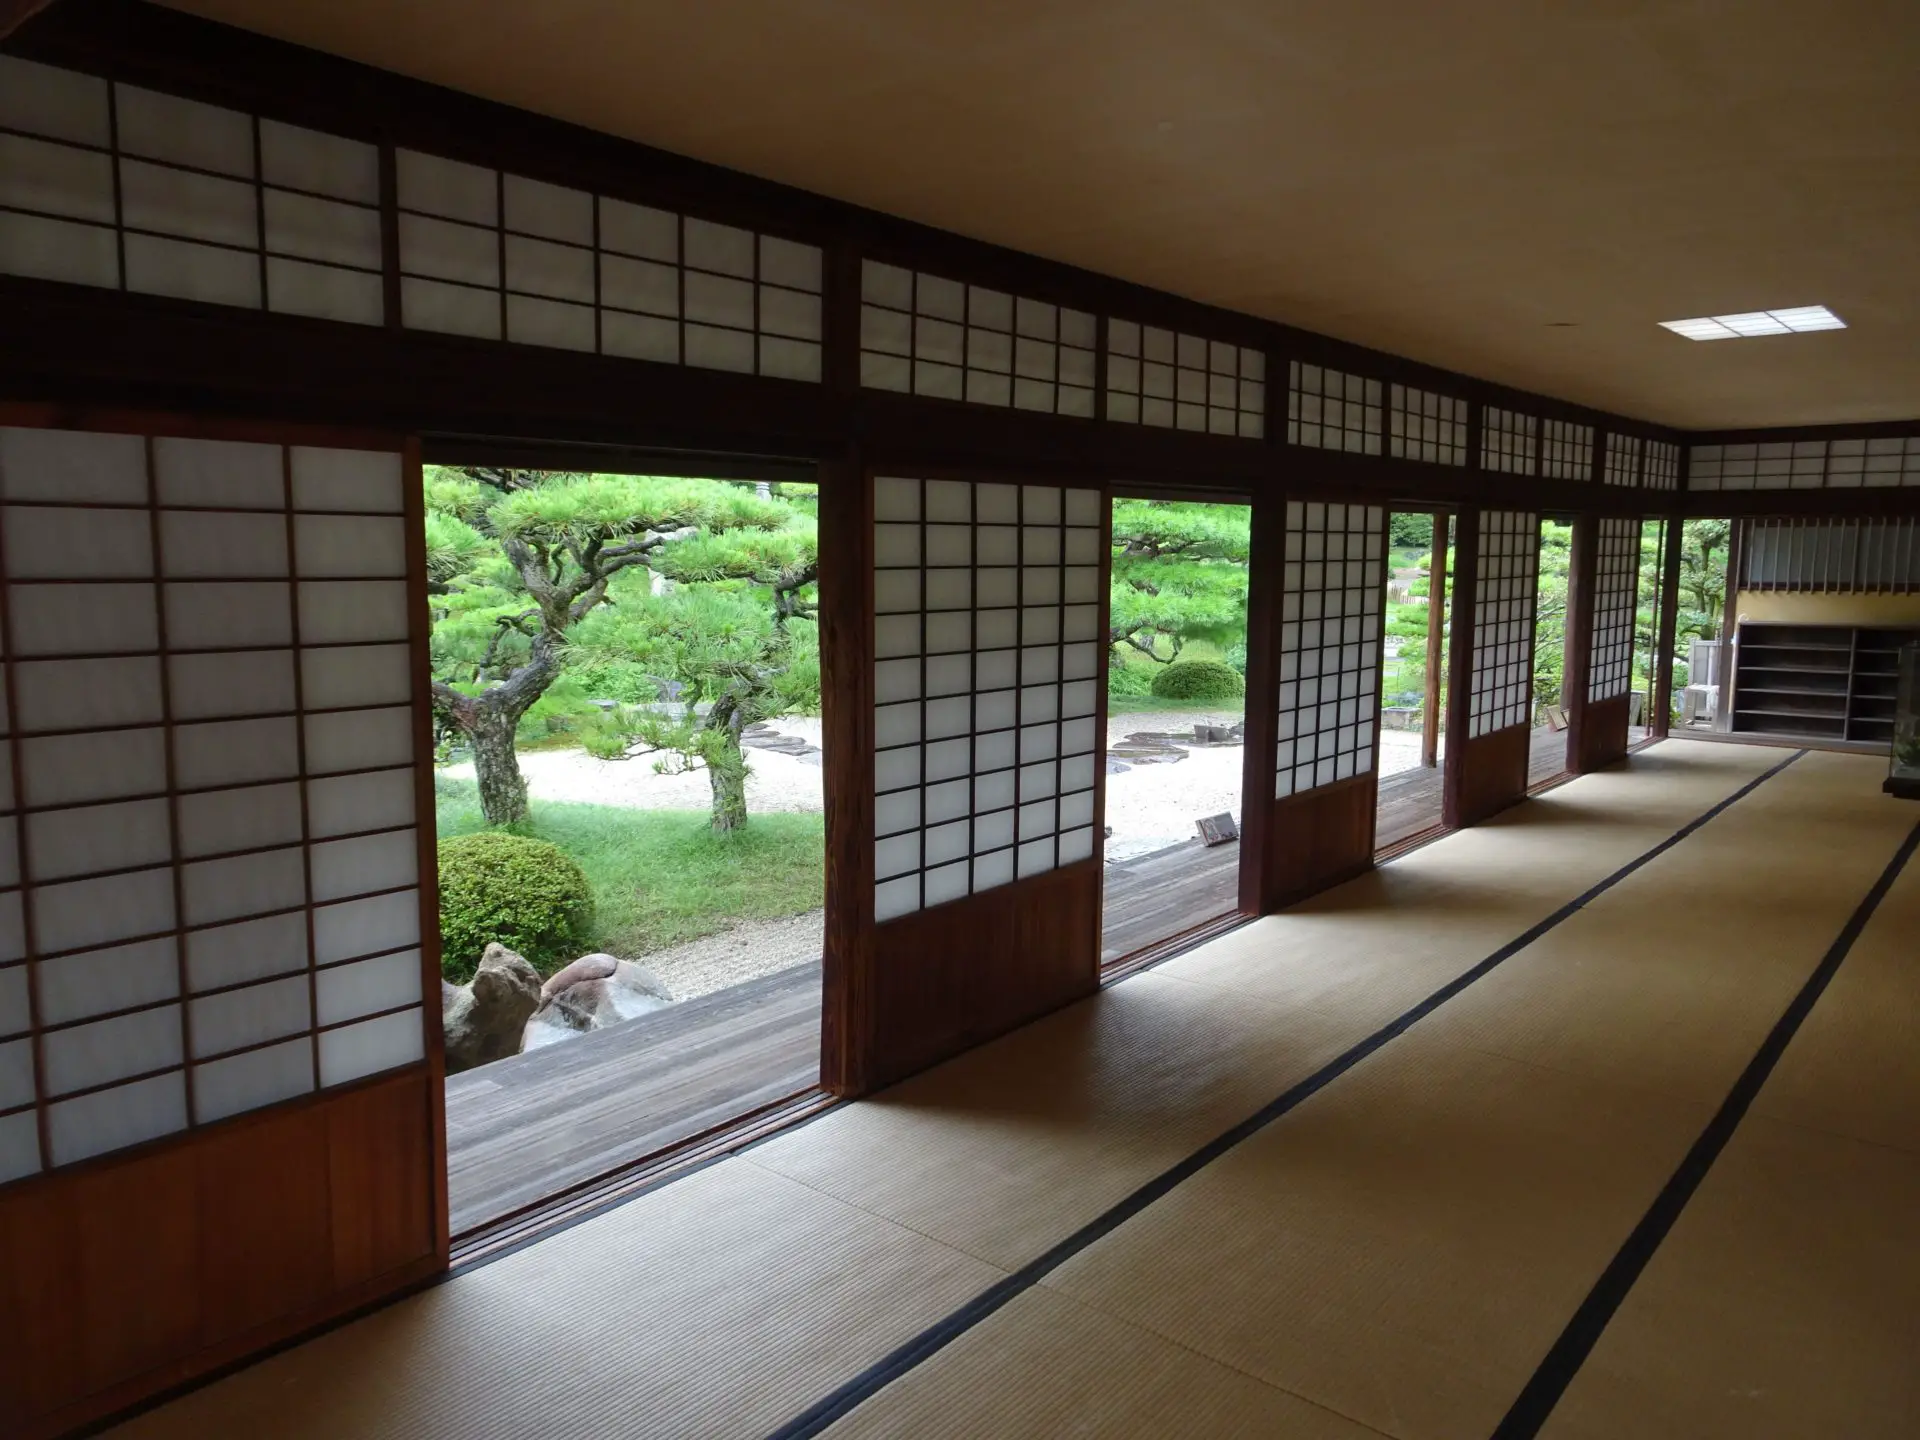 Openings in a tea house wall showing a Japanese garden